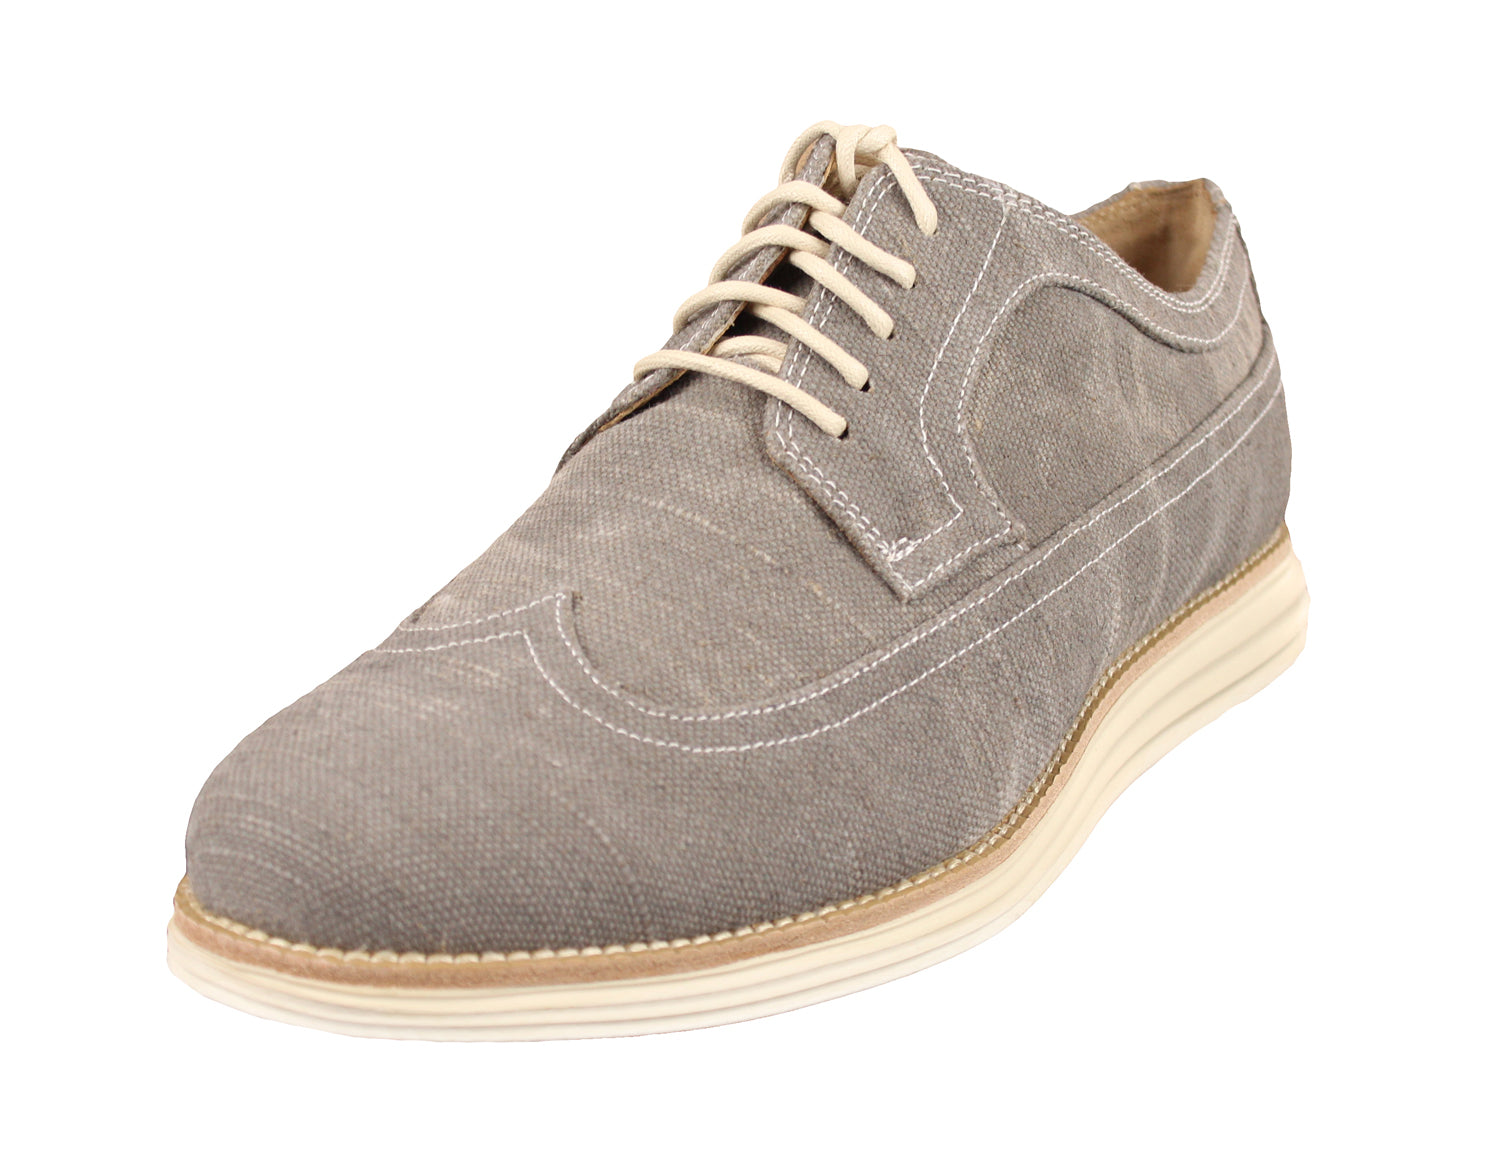 Cole Haan Men's Lunargrand Long Wing Oxford Shoes - Ironstone